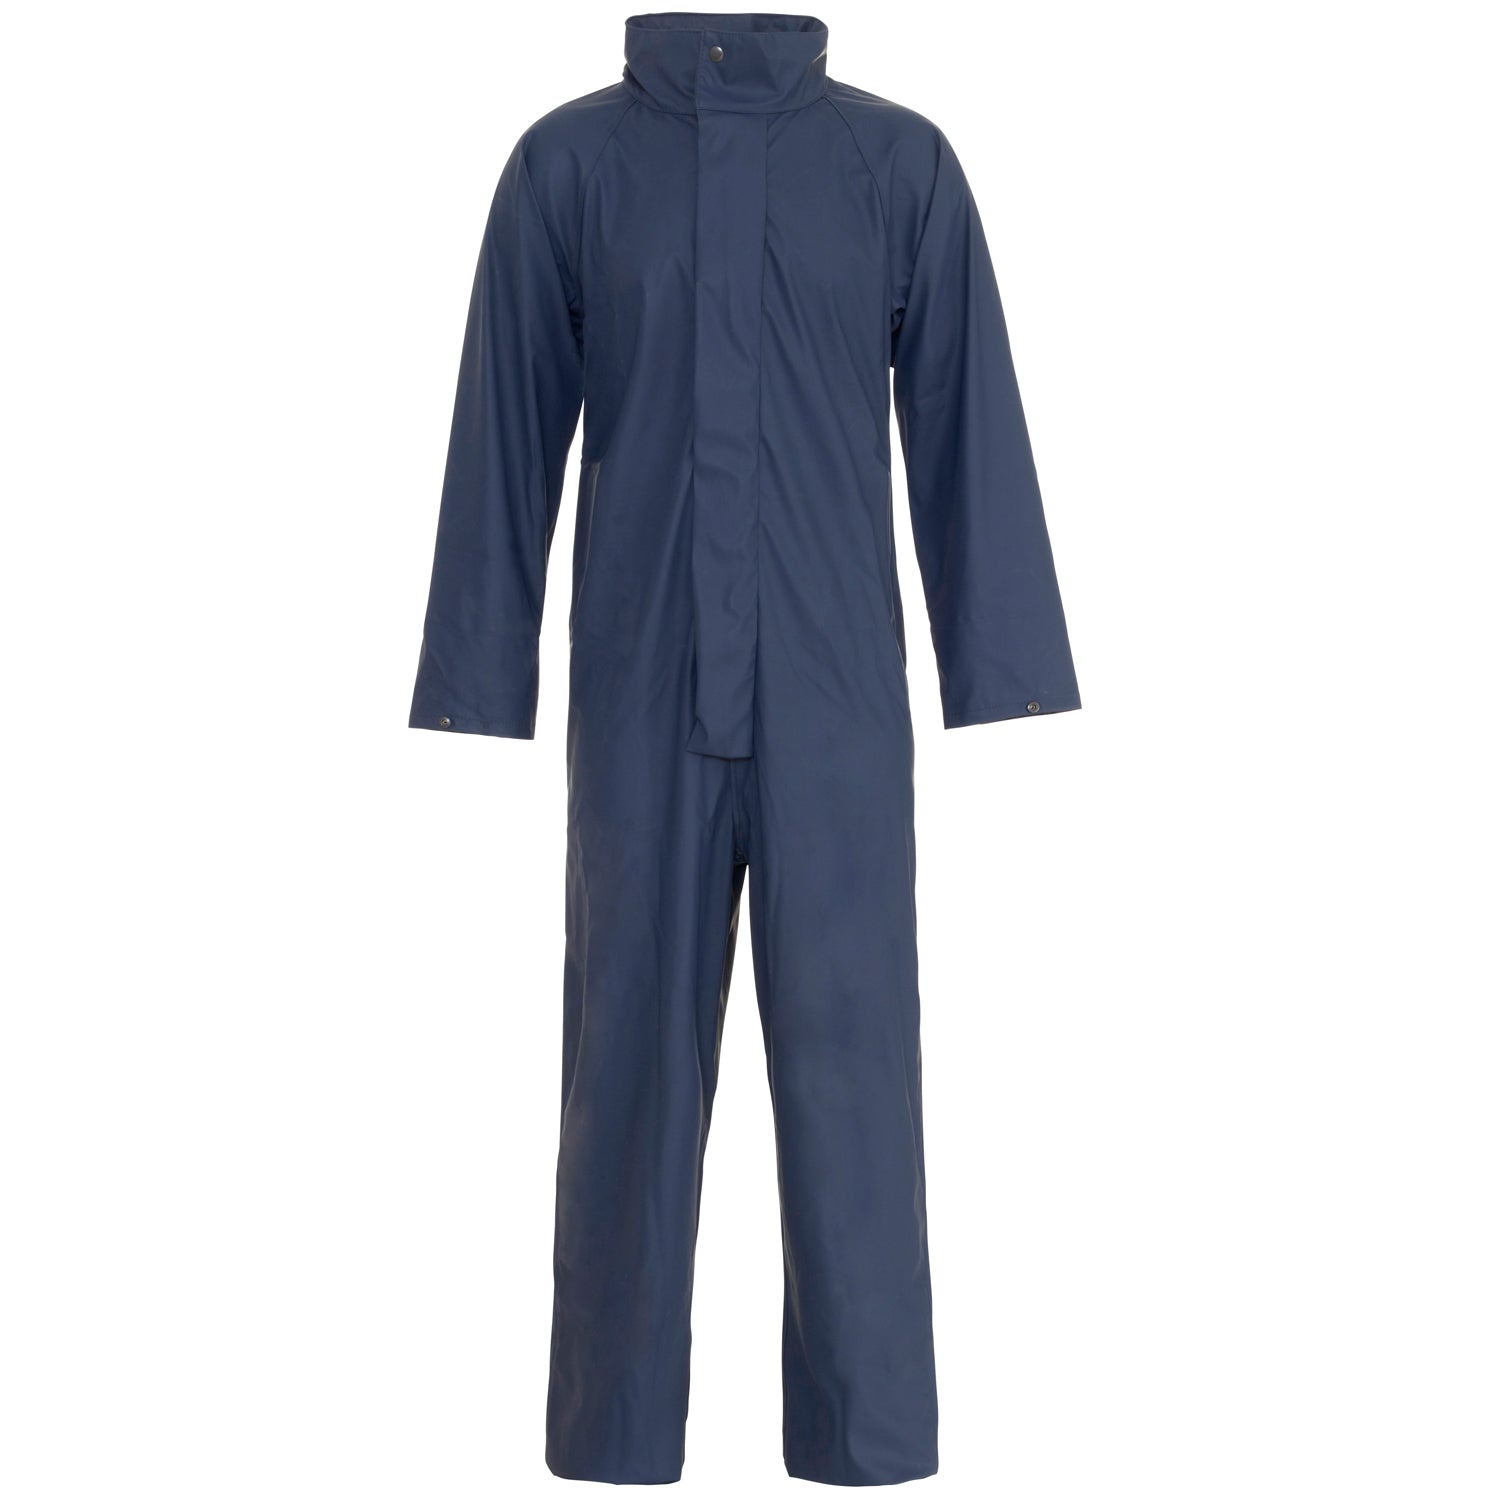 Supertouch Storm-Flex PU Coverall - Navy